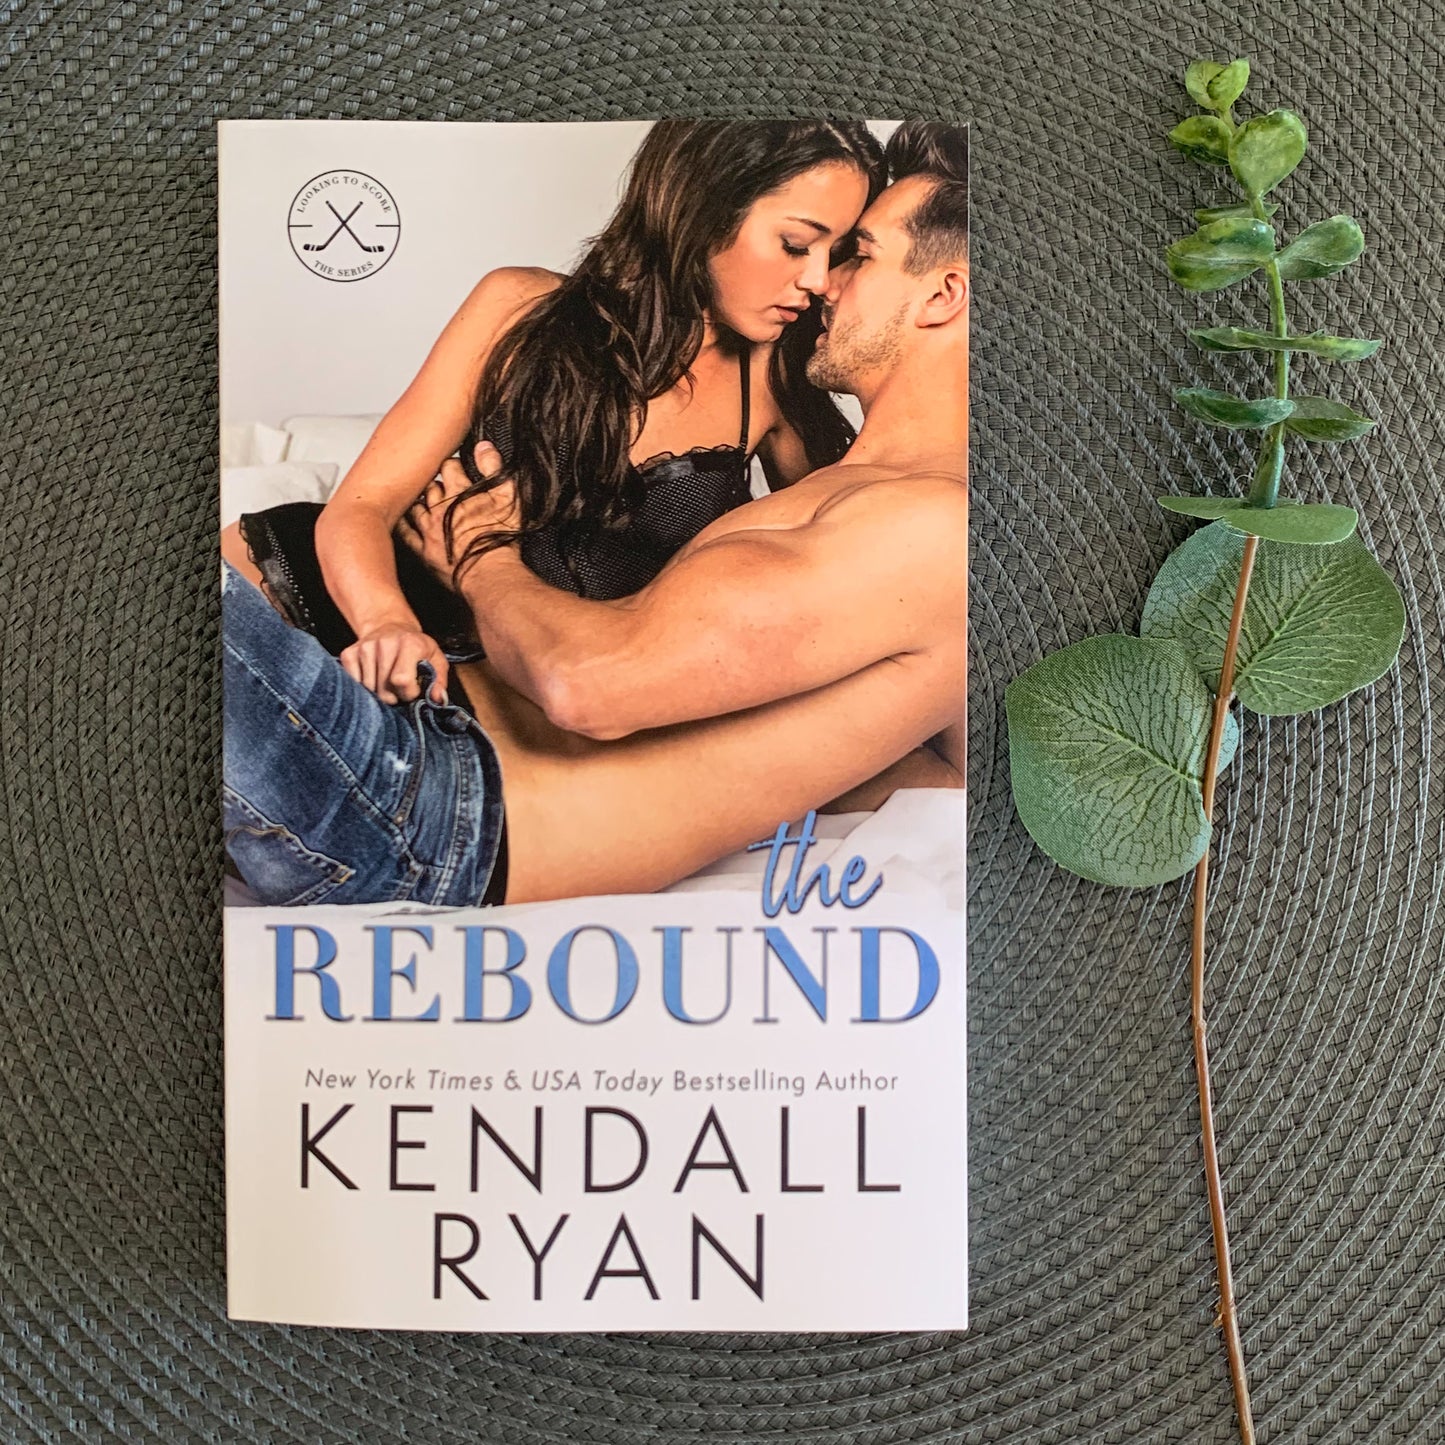 Looking to Score series by Kendall Ryan